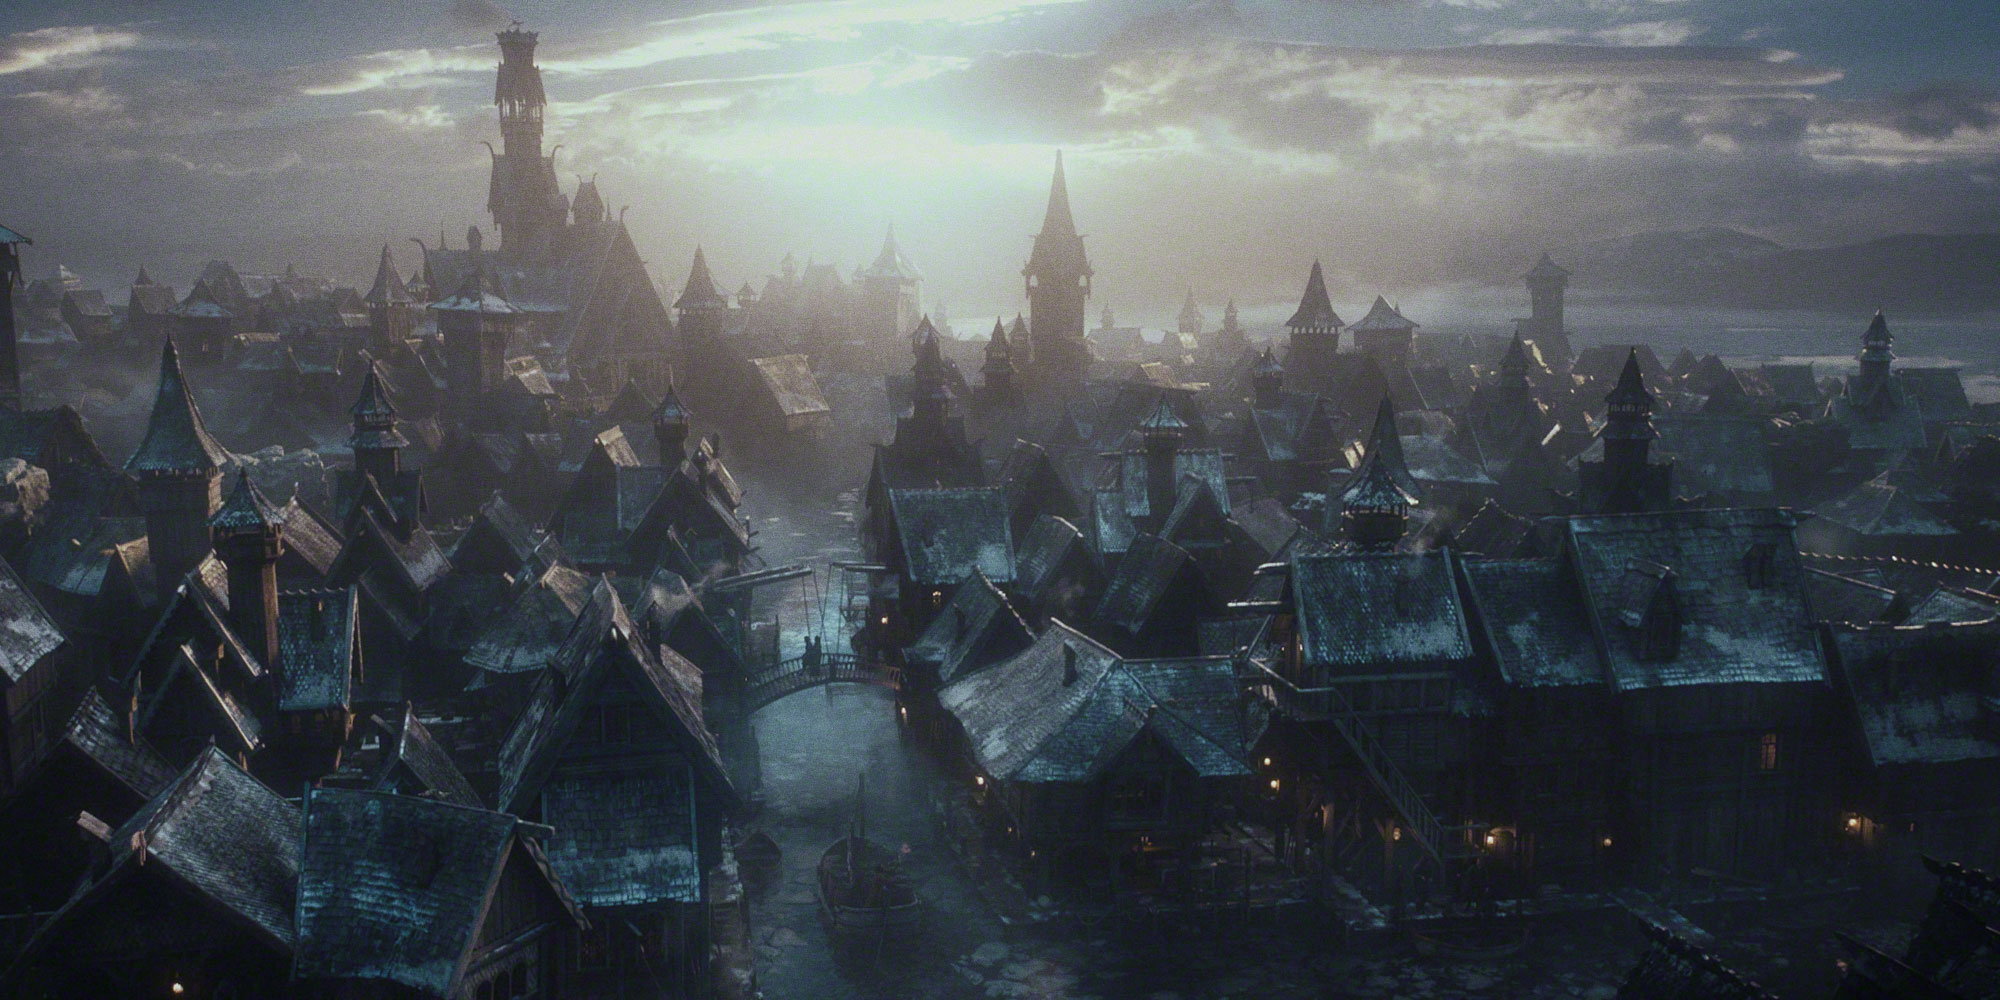 instal The Hobbit: The Desolation of Smaug free